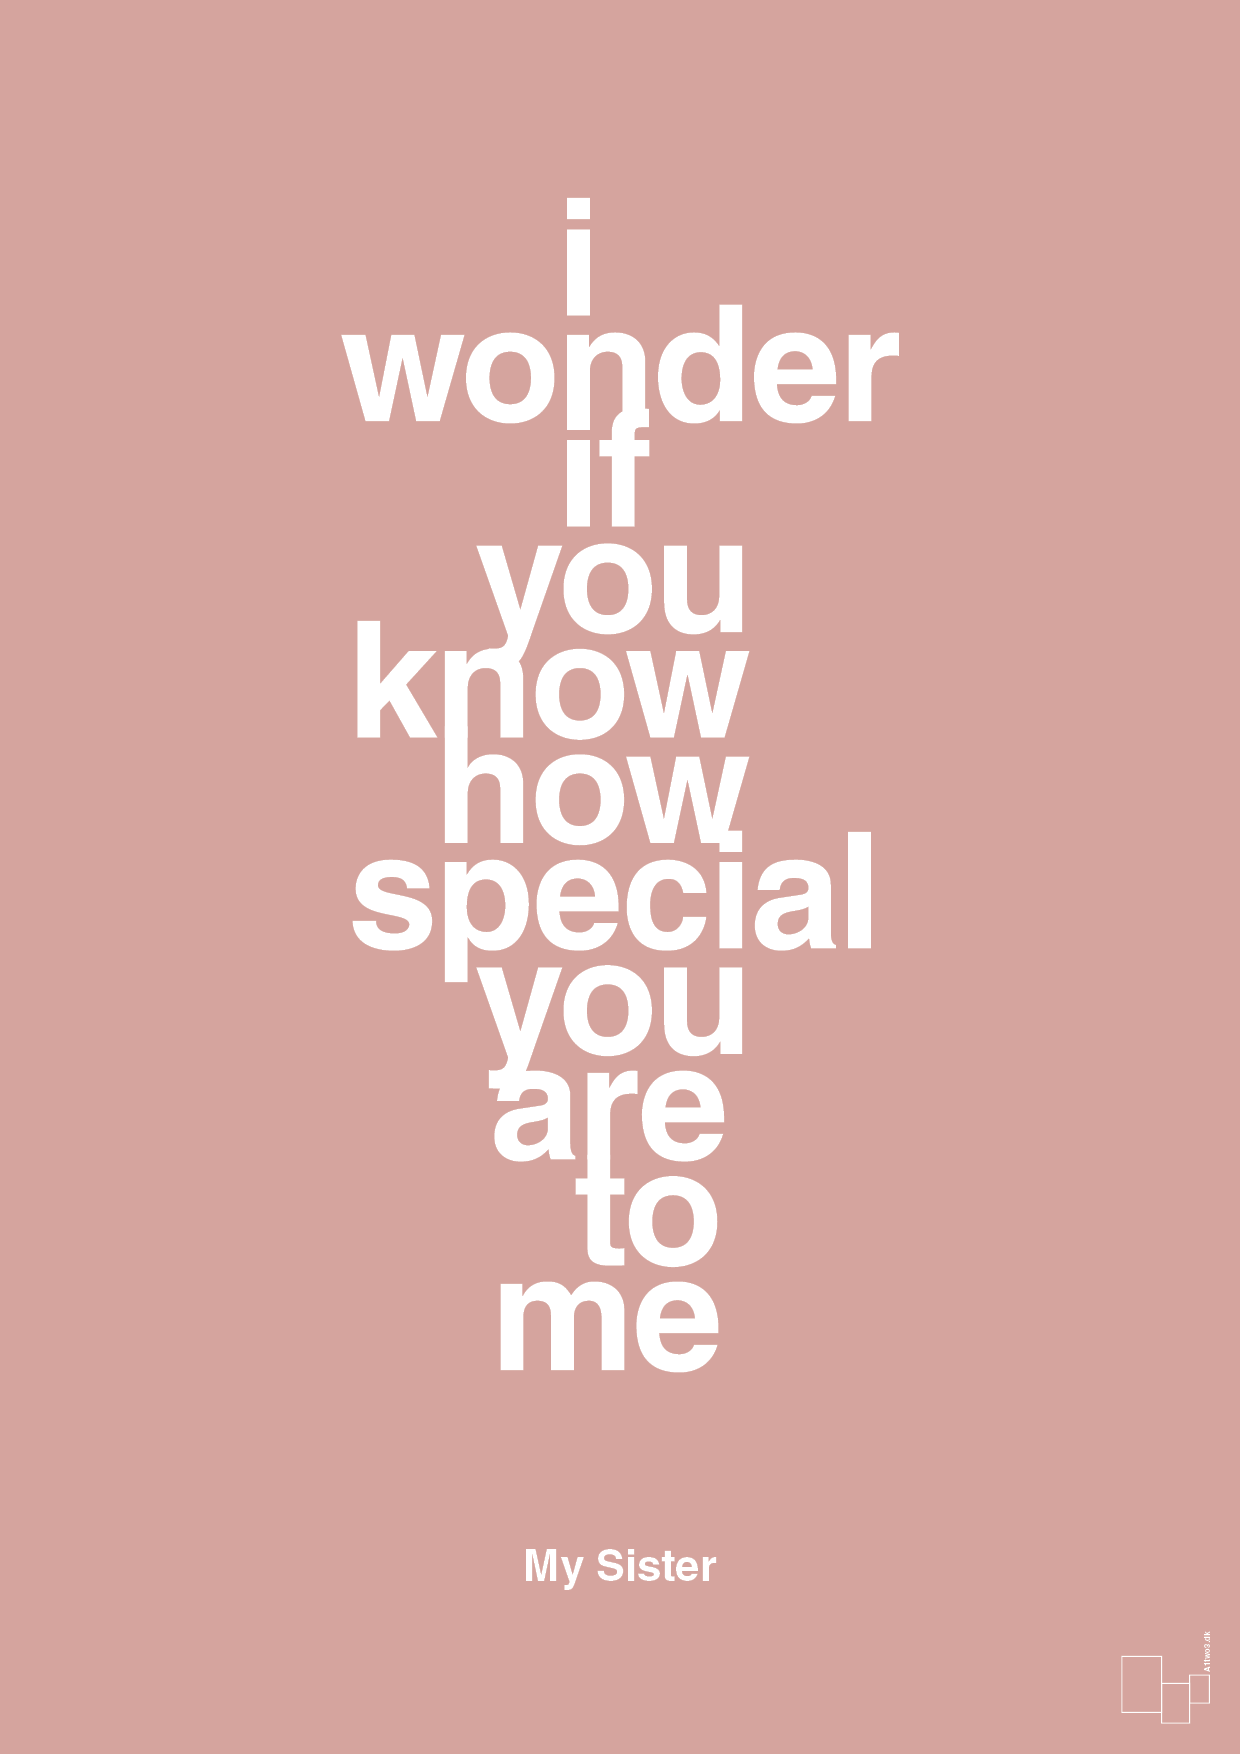 my sister - i wonder if you know how special you are to me - Plakat med Citater i Bubble Shell